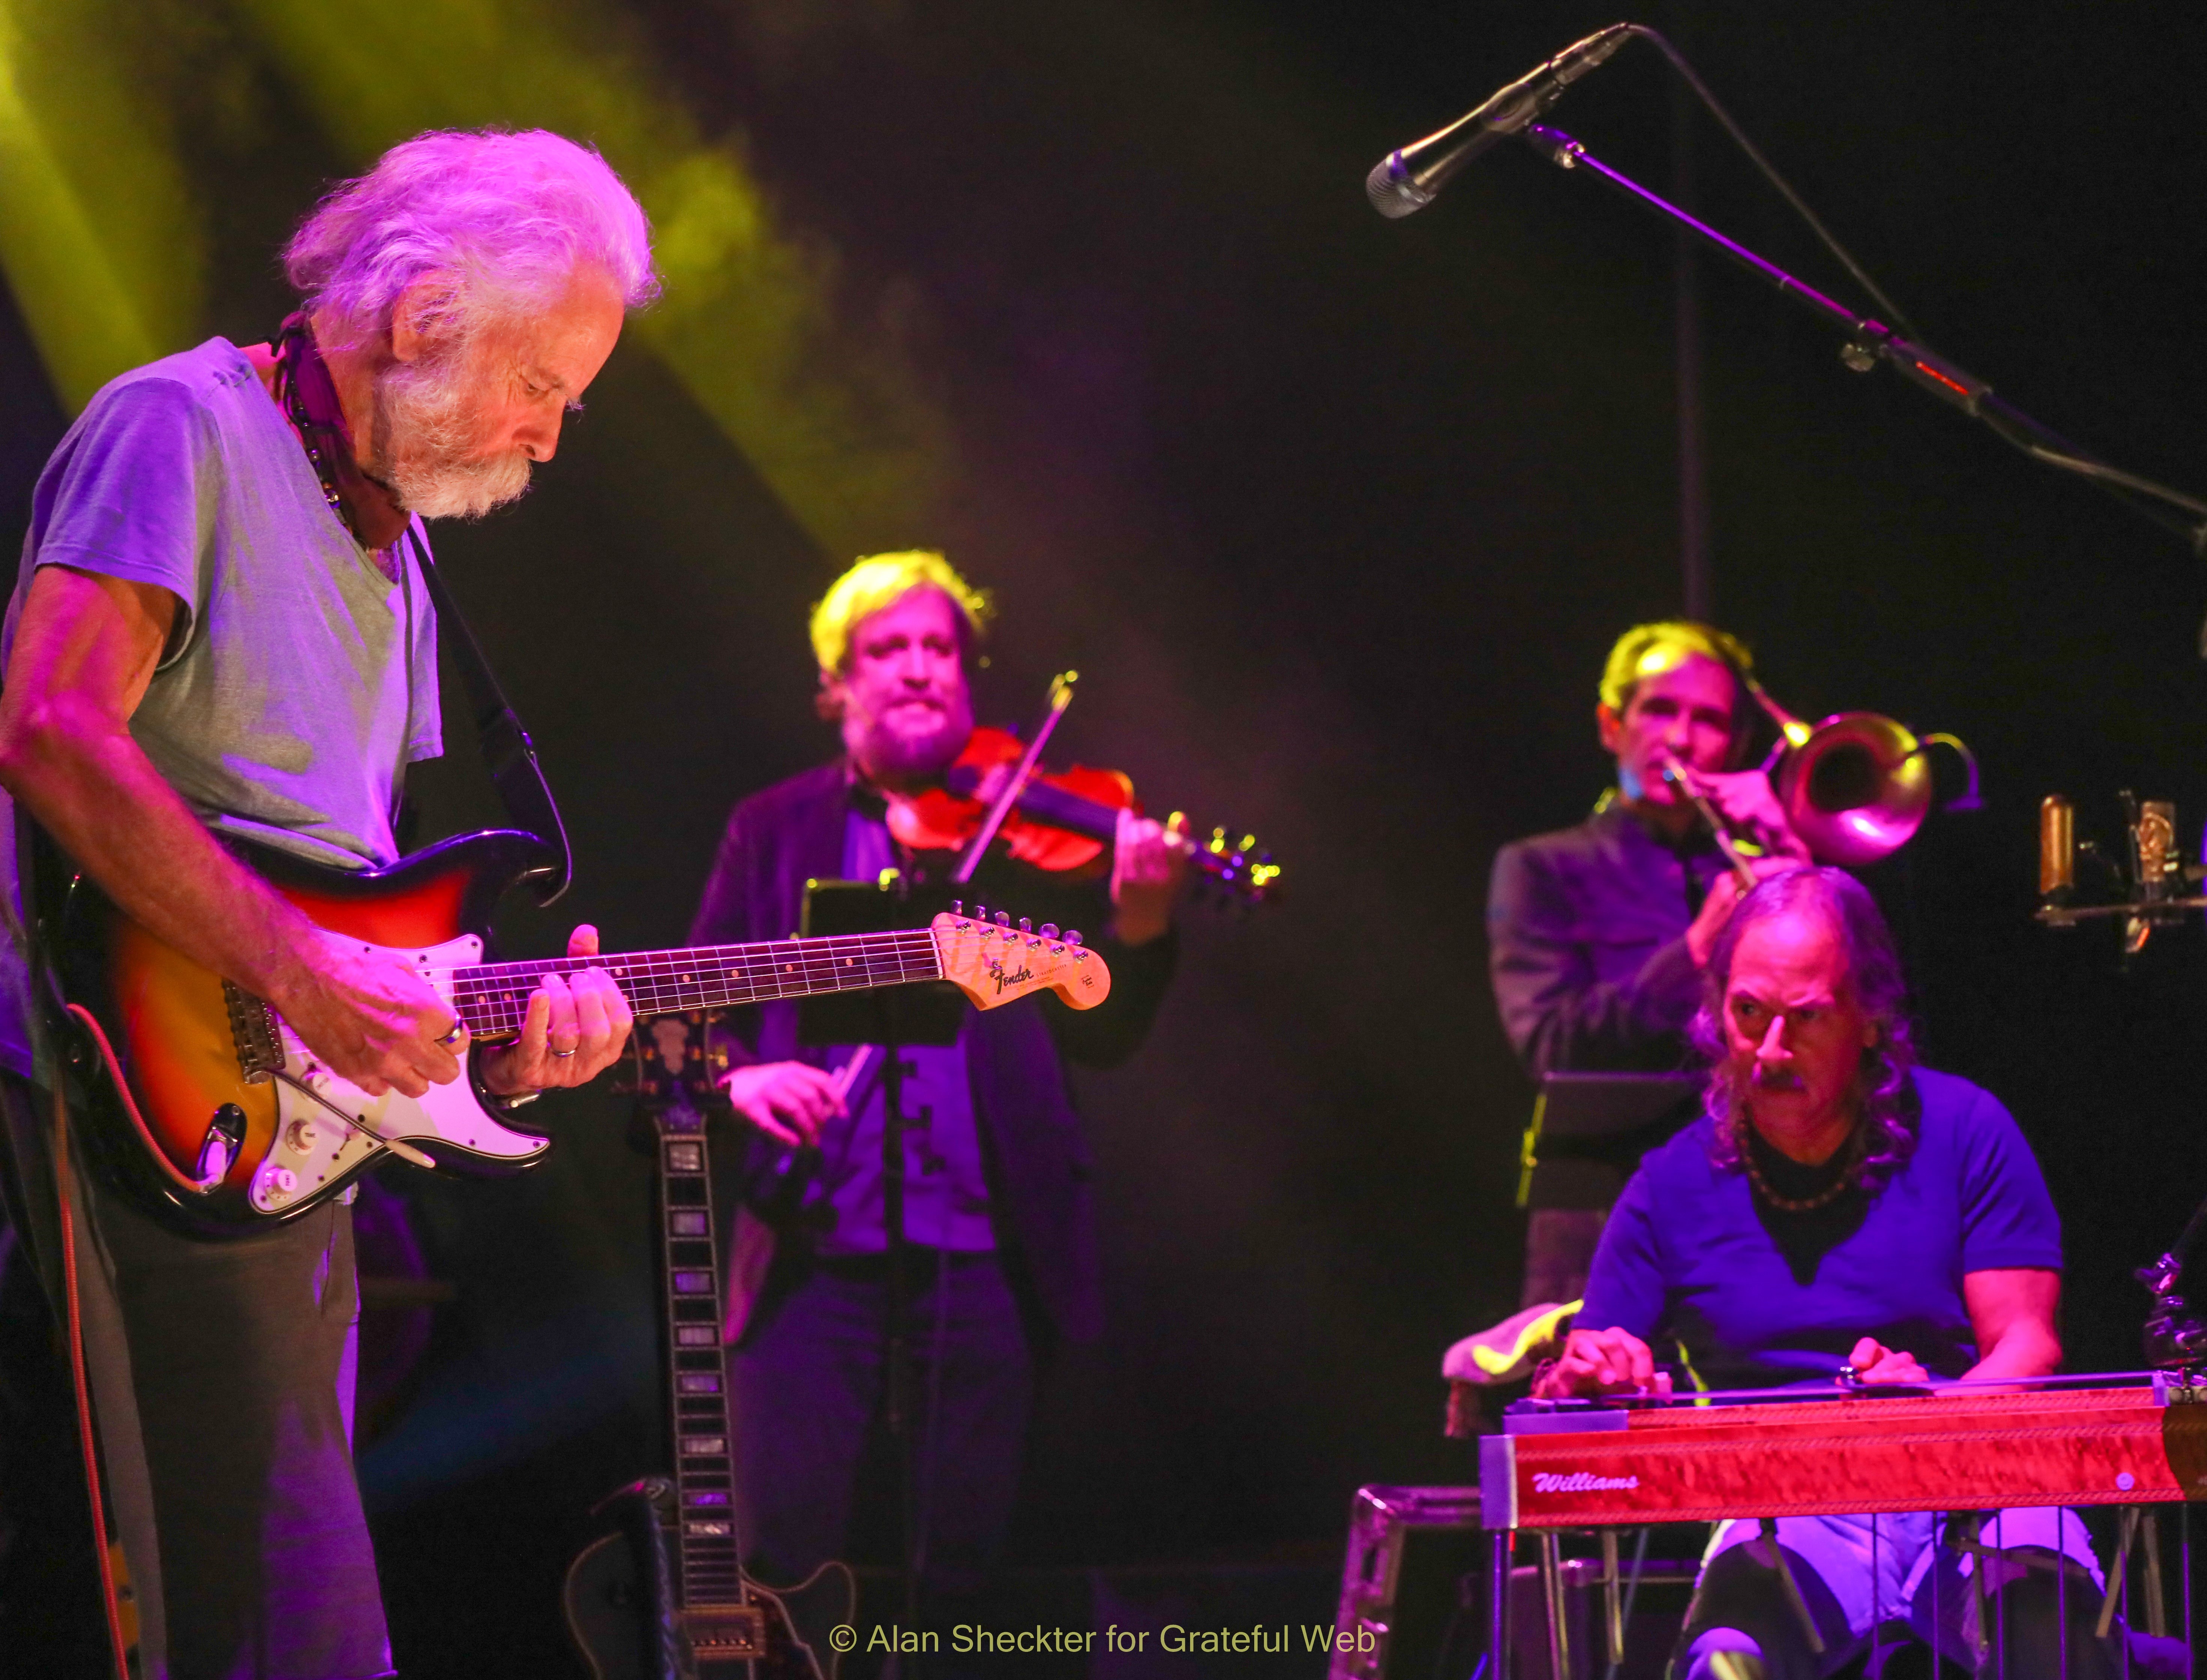 By Alan Sheckter, Oct. 14, The Warfield, San Francisco